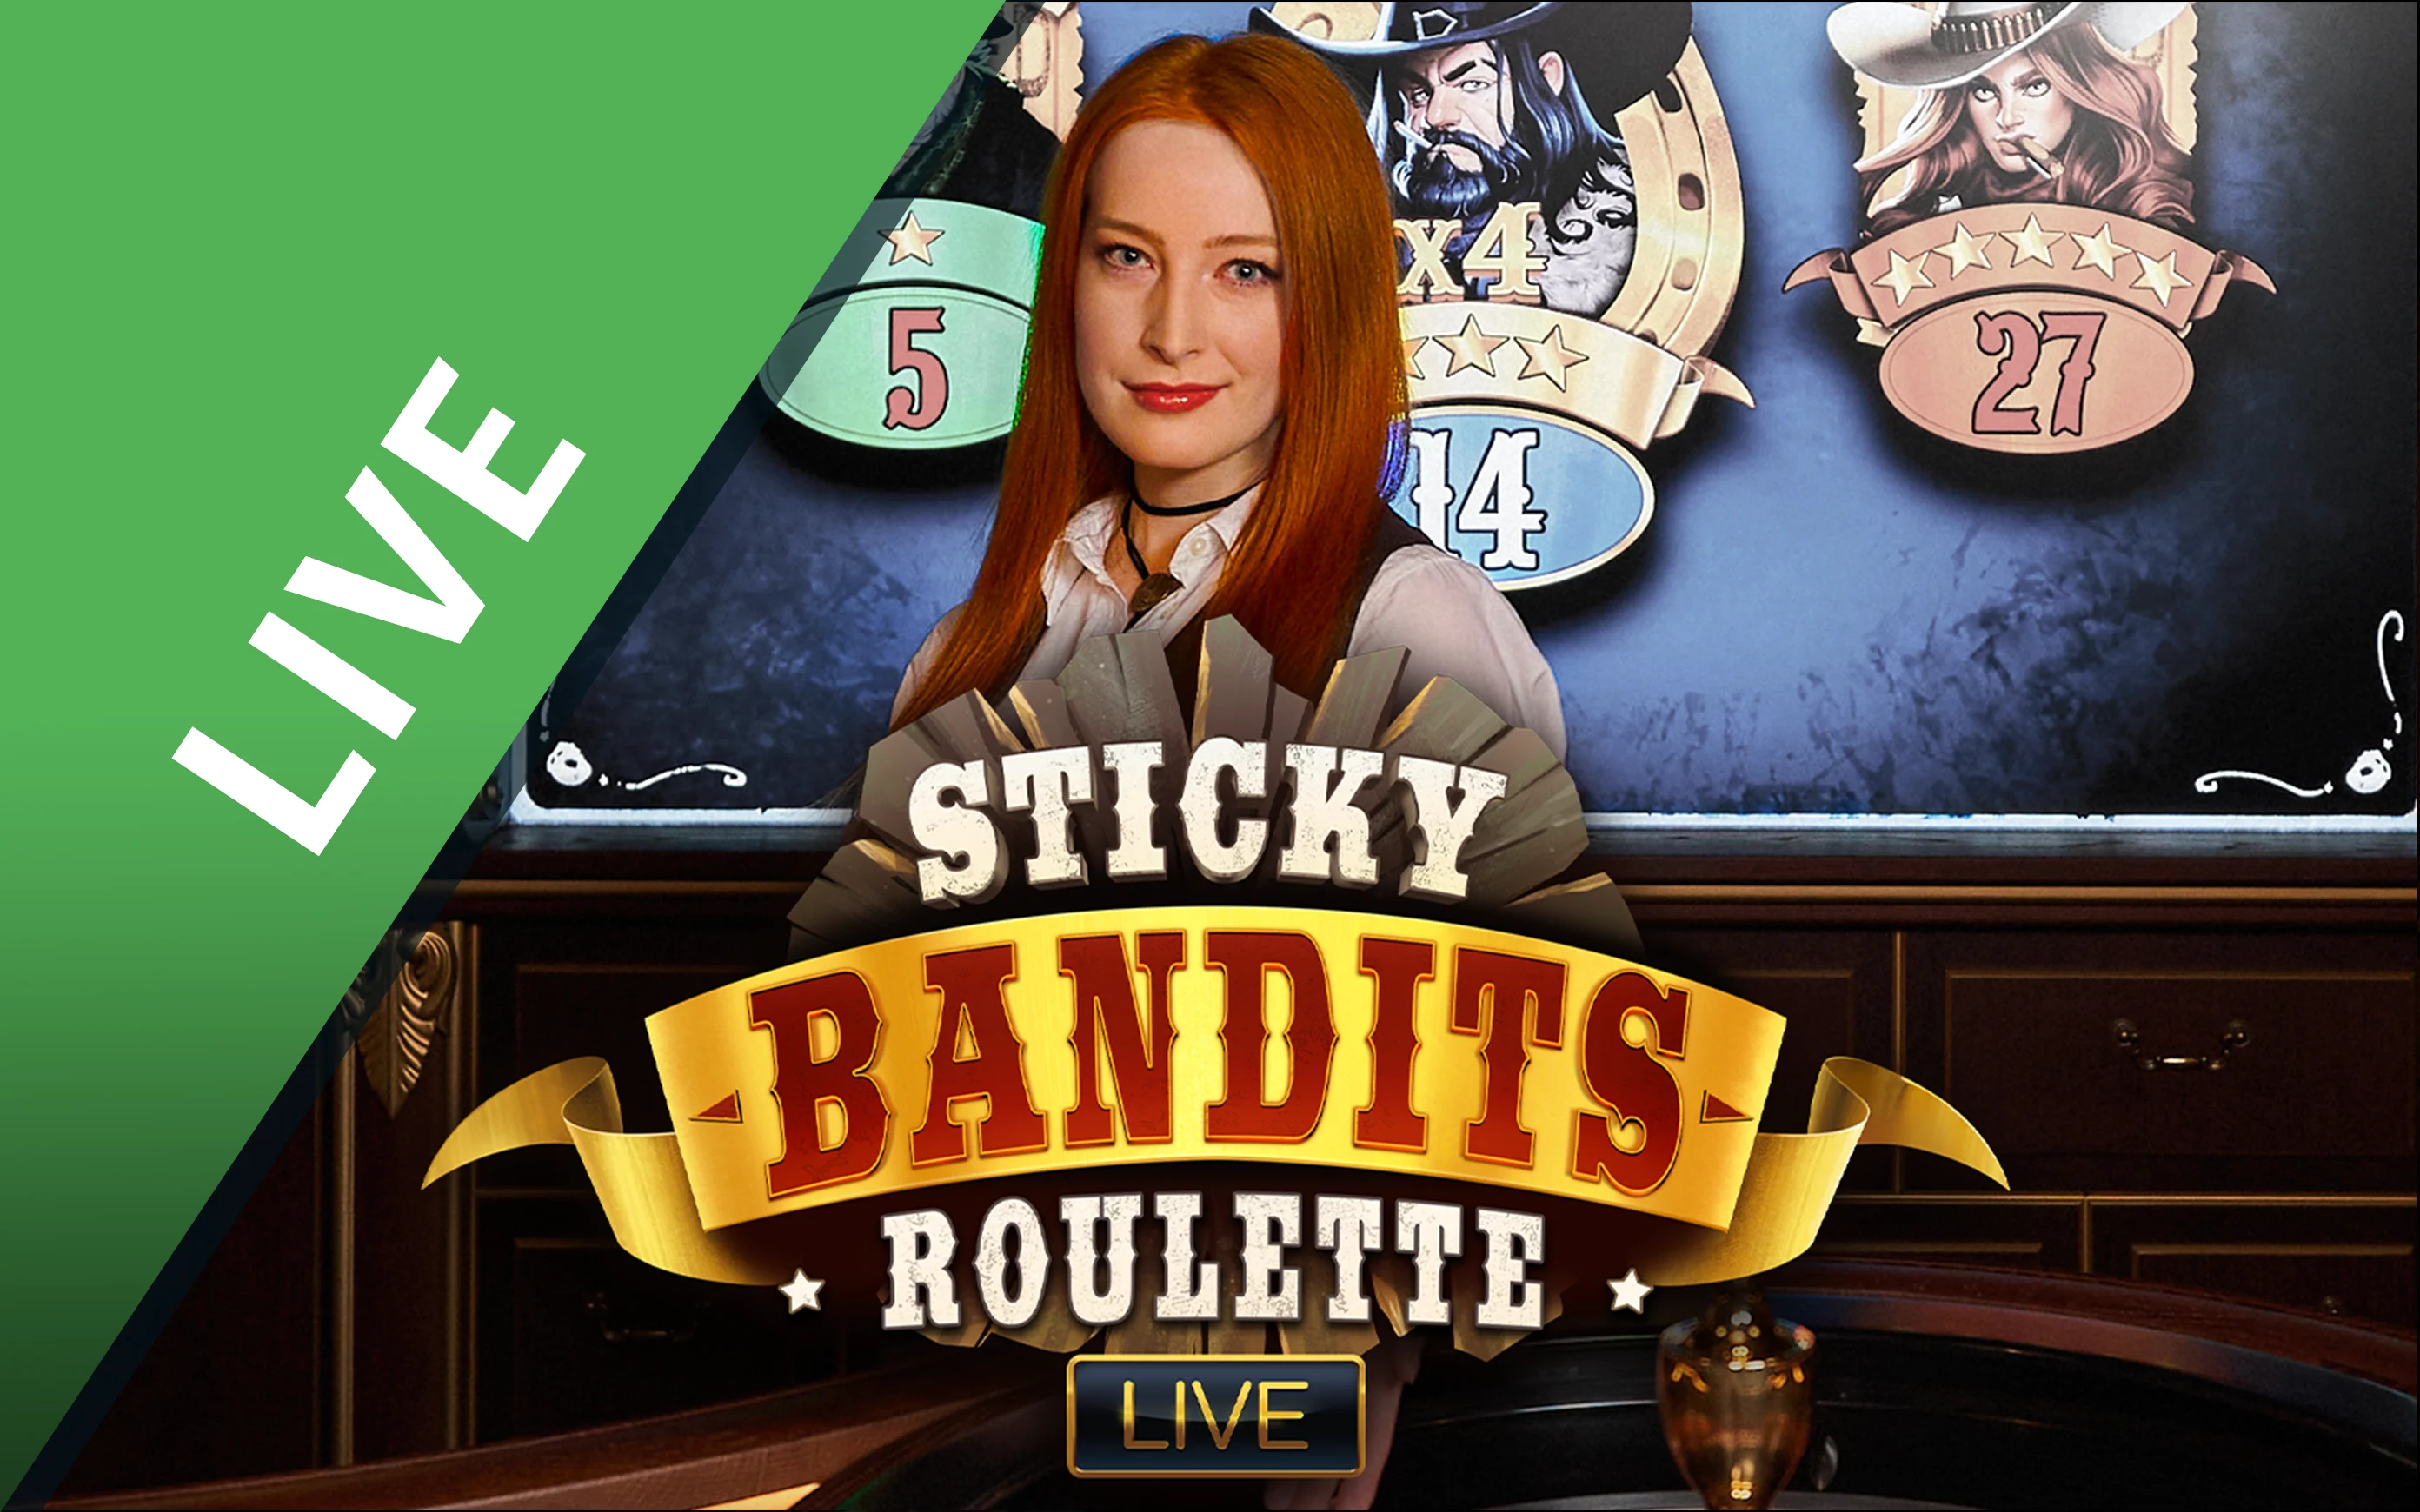 Play Sticky Bandits Roulette on Starcasino.be online casino